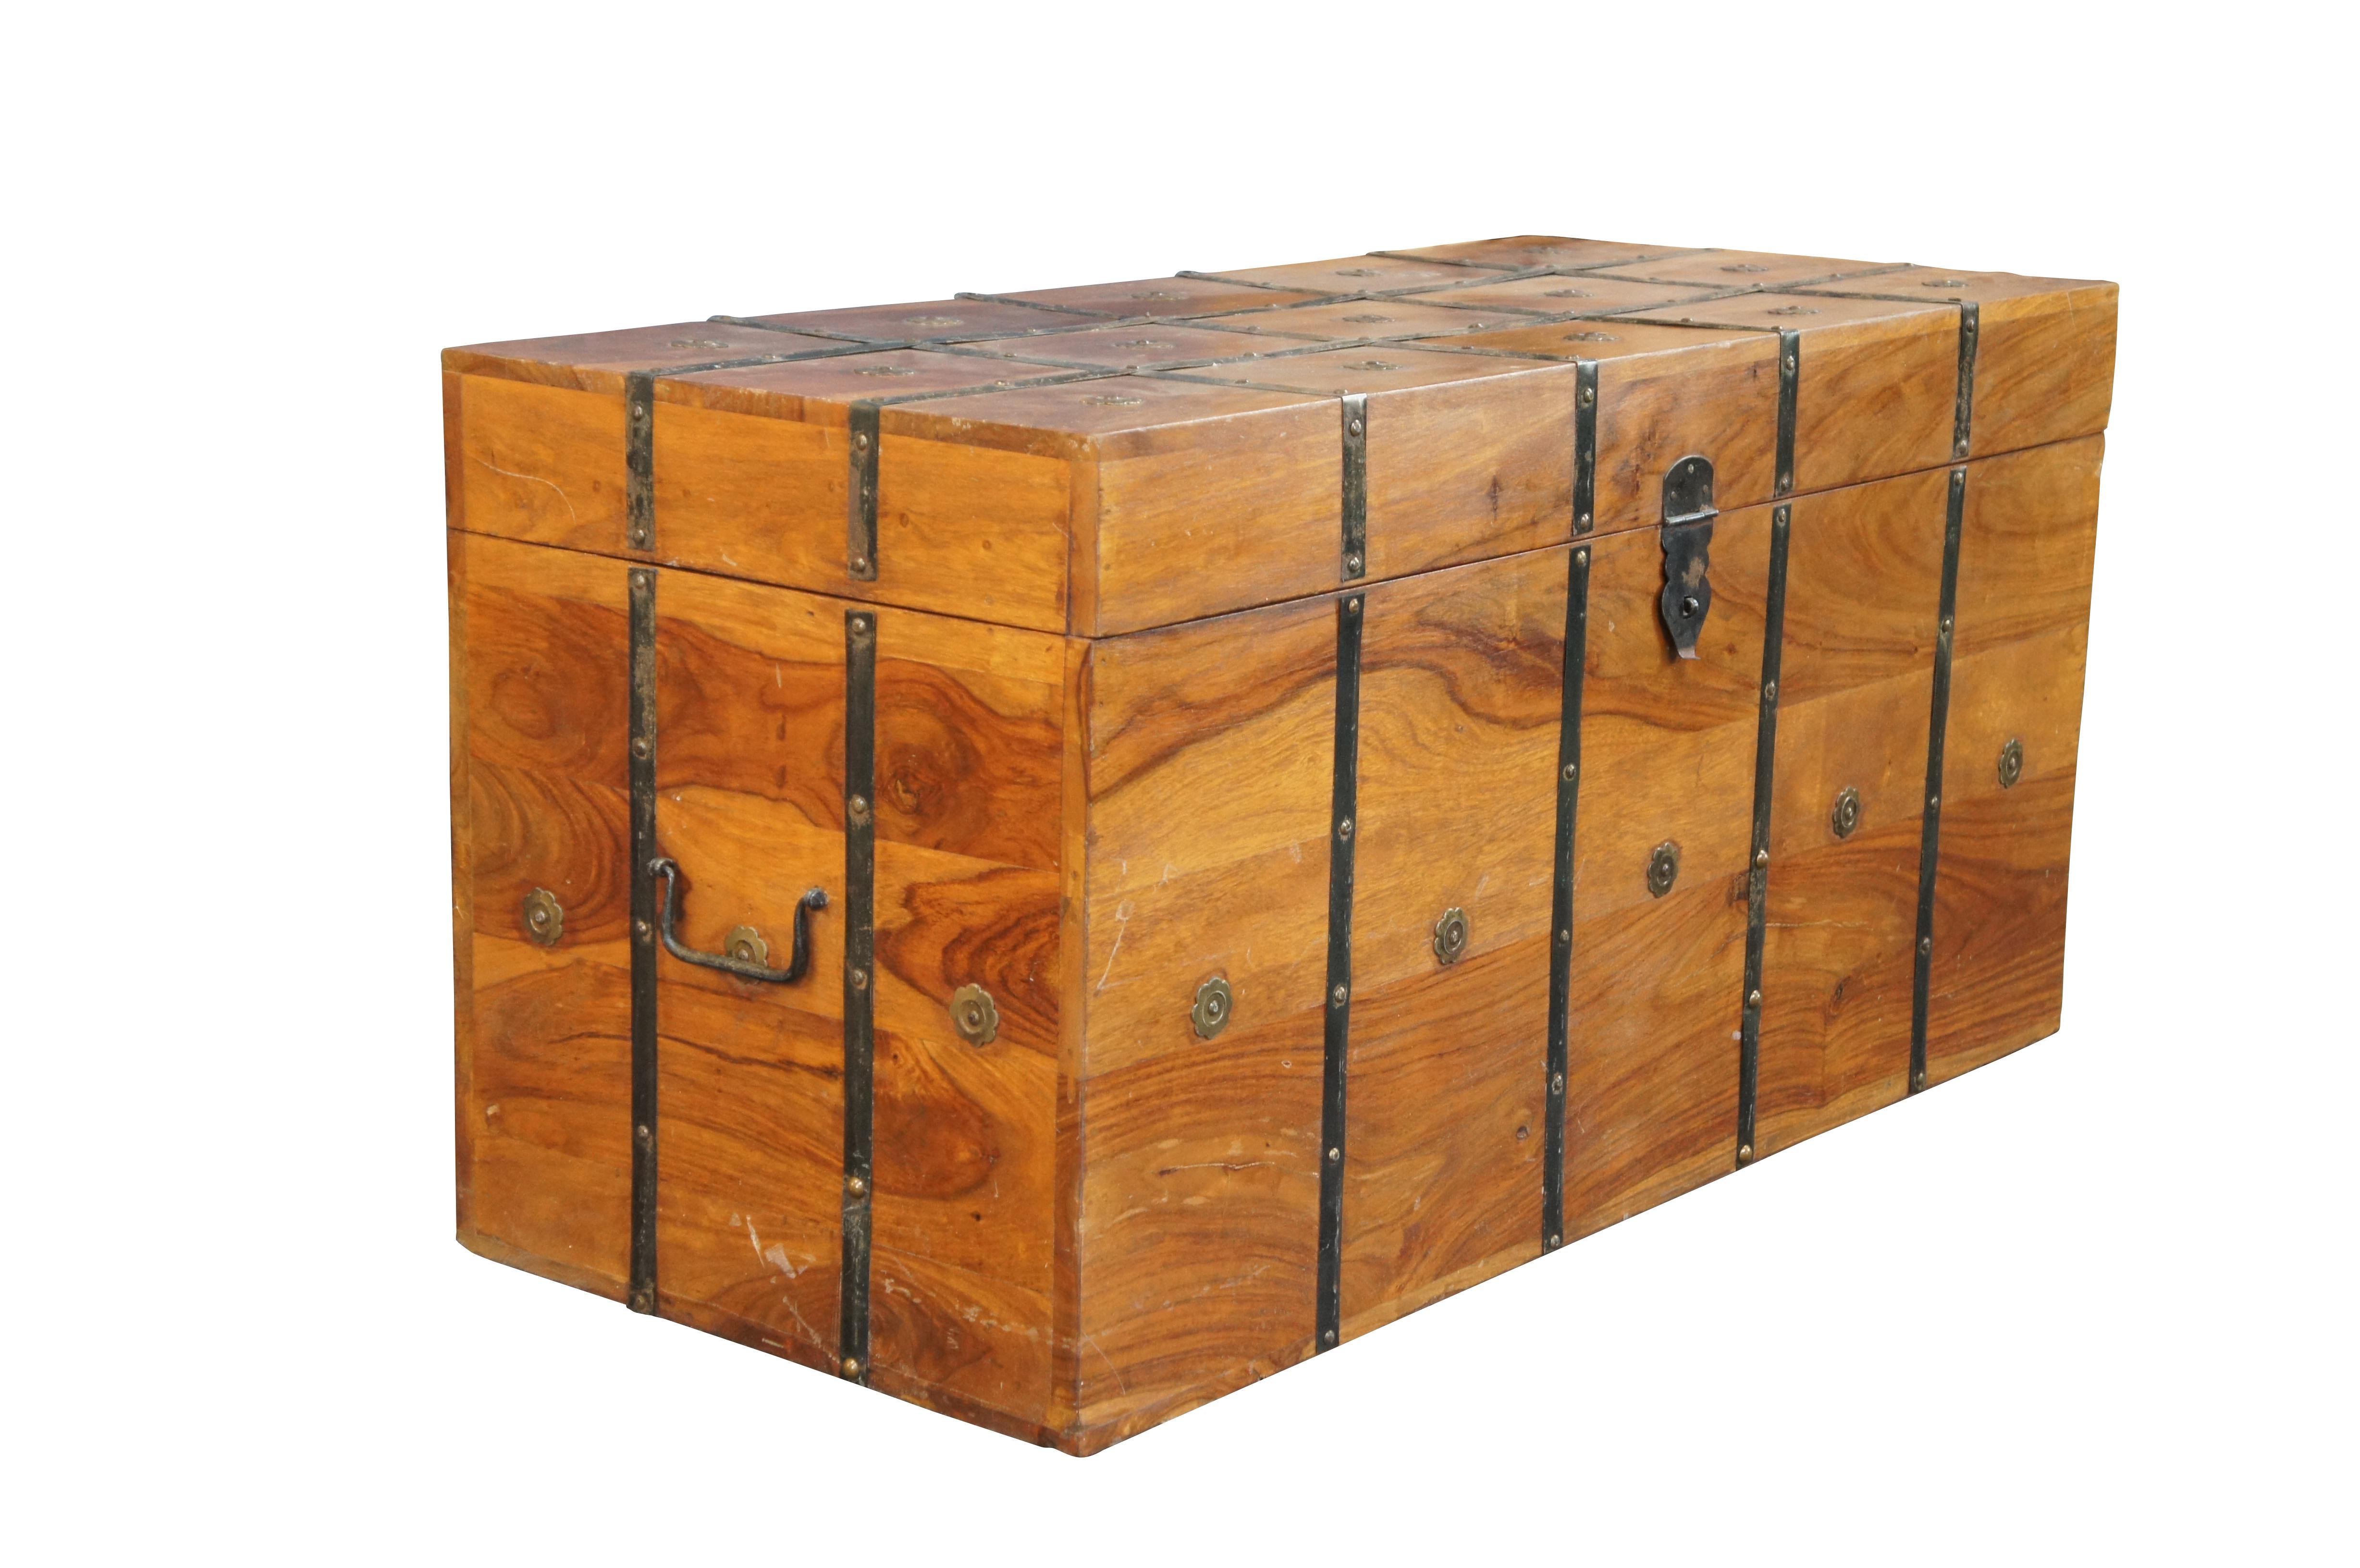 Late 20th century British Colonial style Sheesham wood blanket storage chest or coffee table. Features a beautiful mulitone finish with brass accents and iron banded hardware.

Dimensions:
39.5